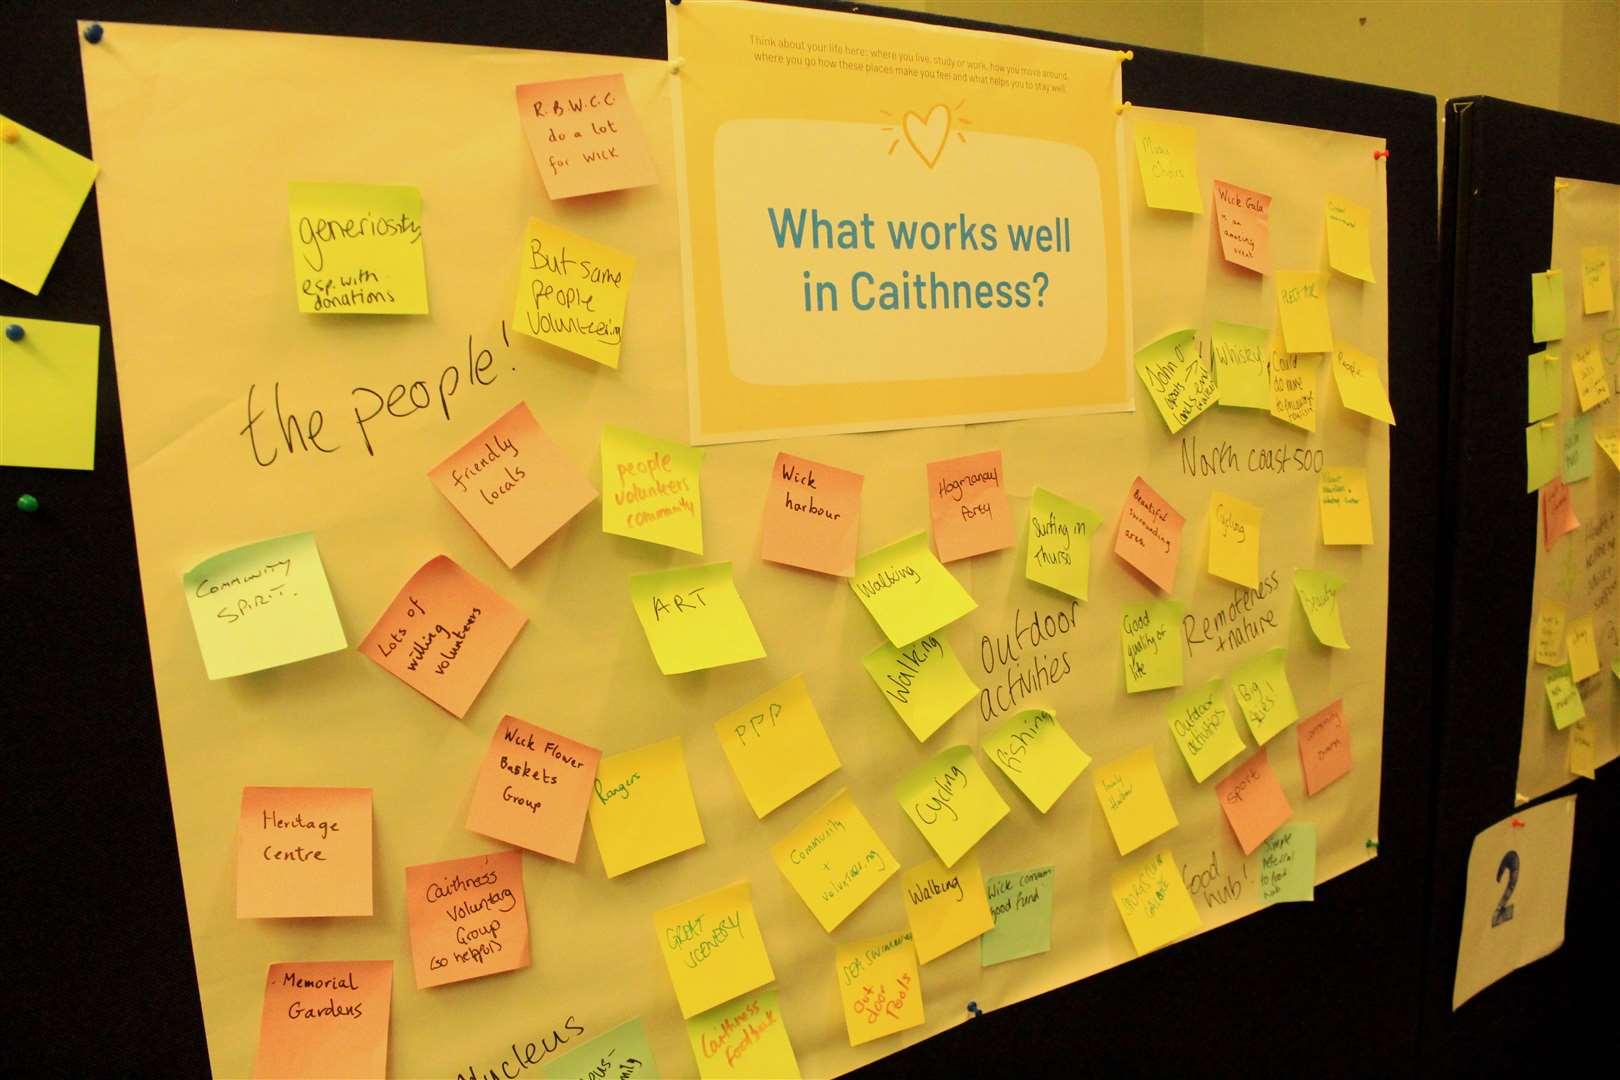 A board full of sticky notes on 'what works well in Caithness'.